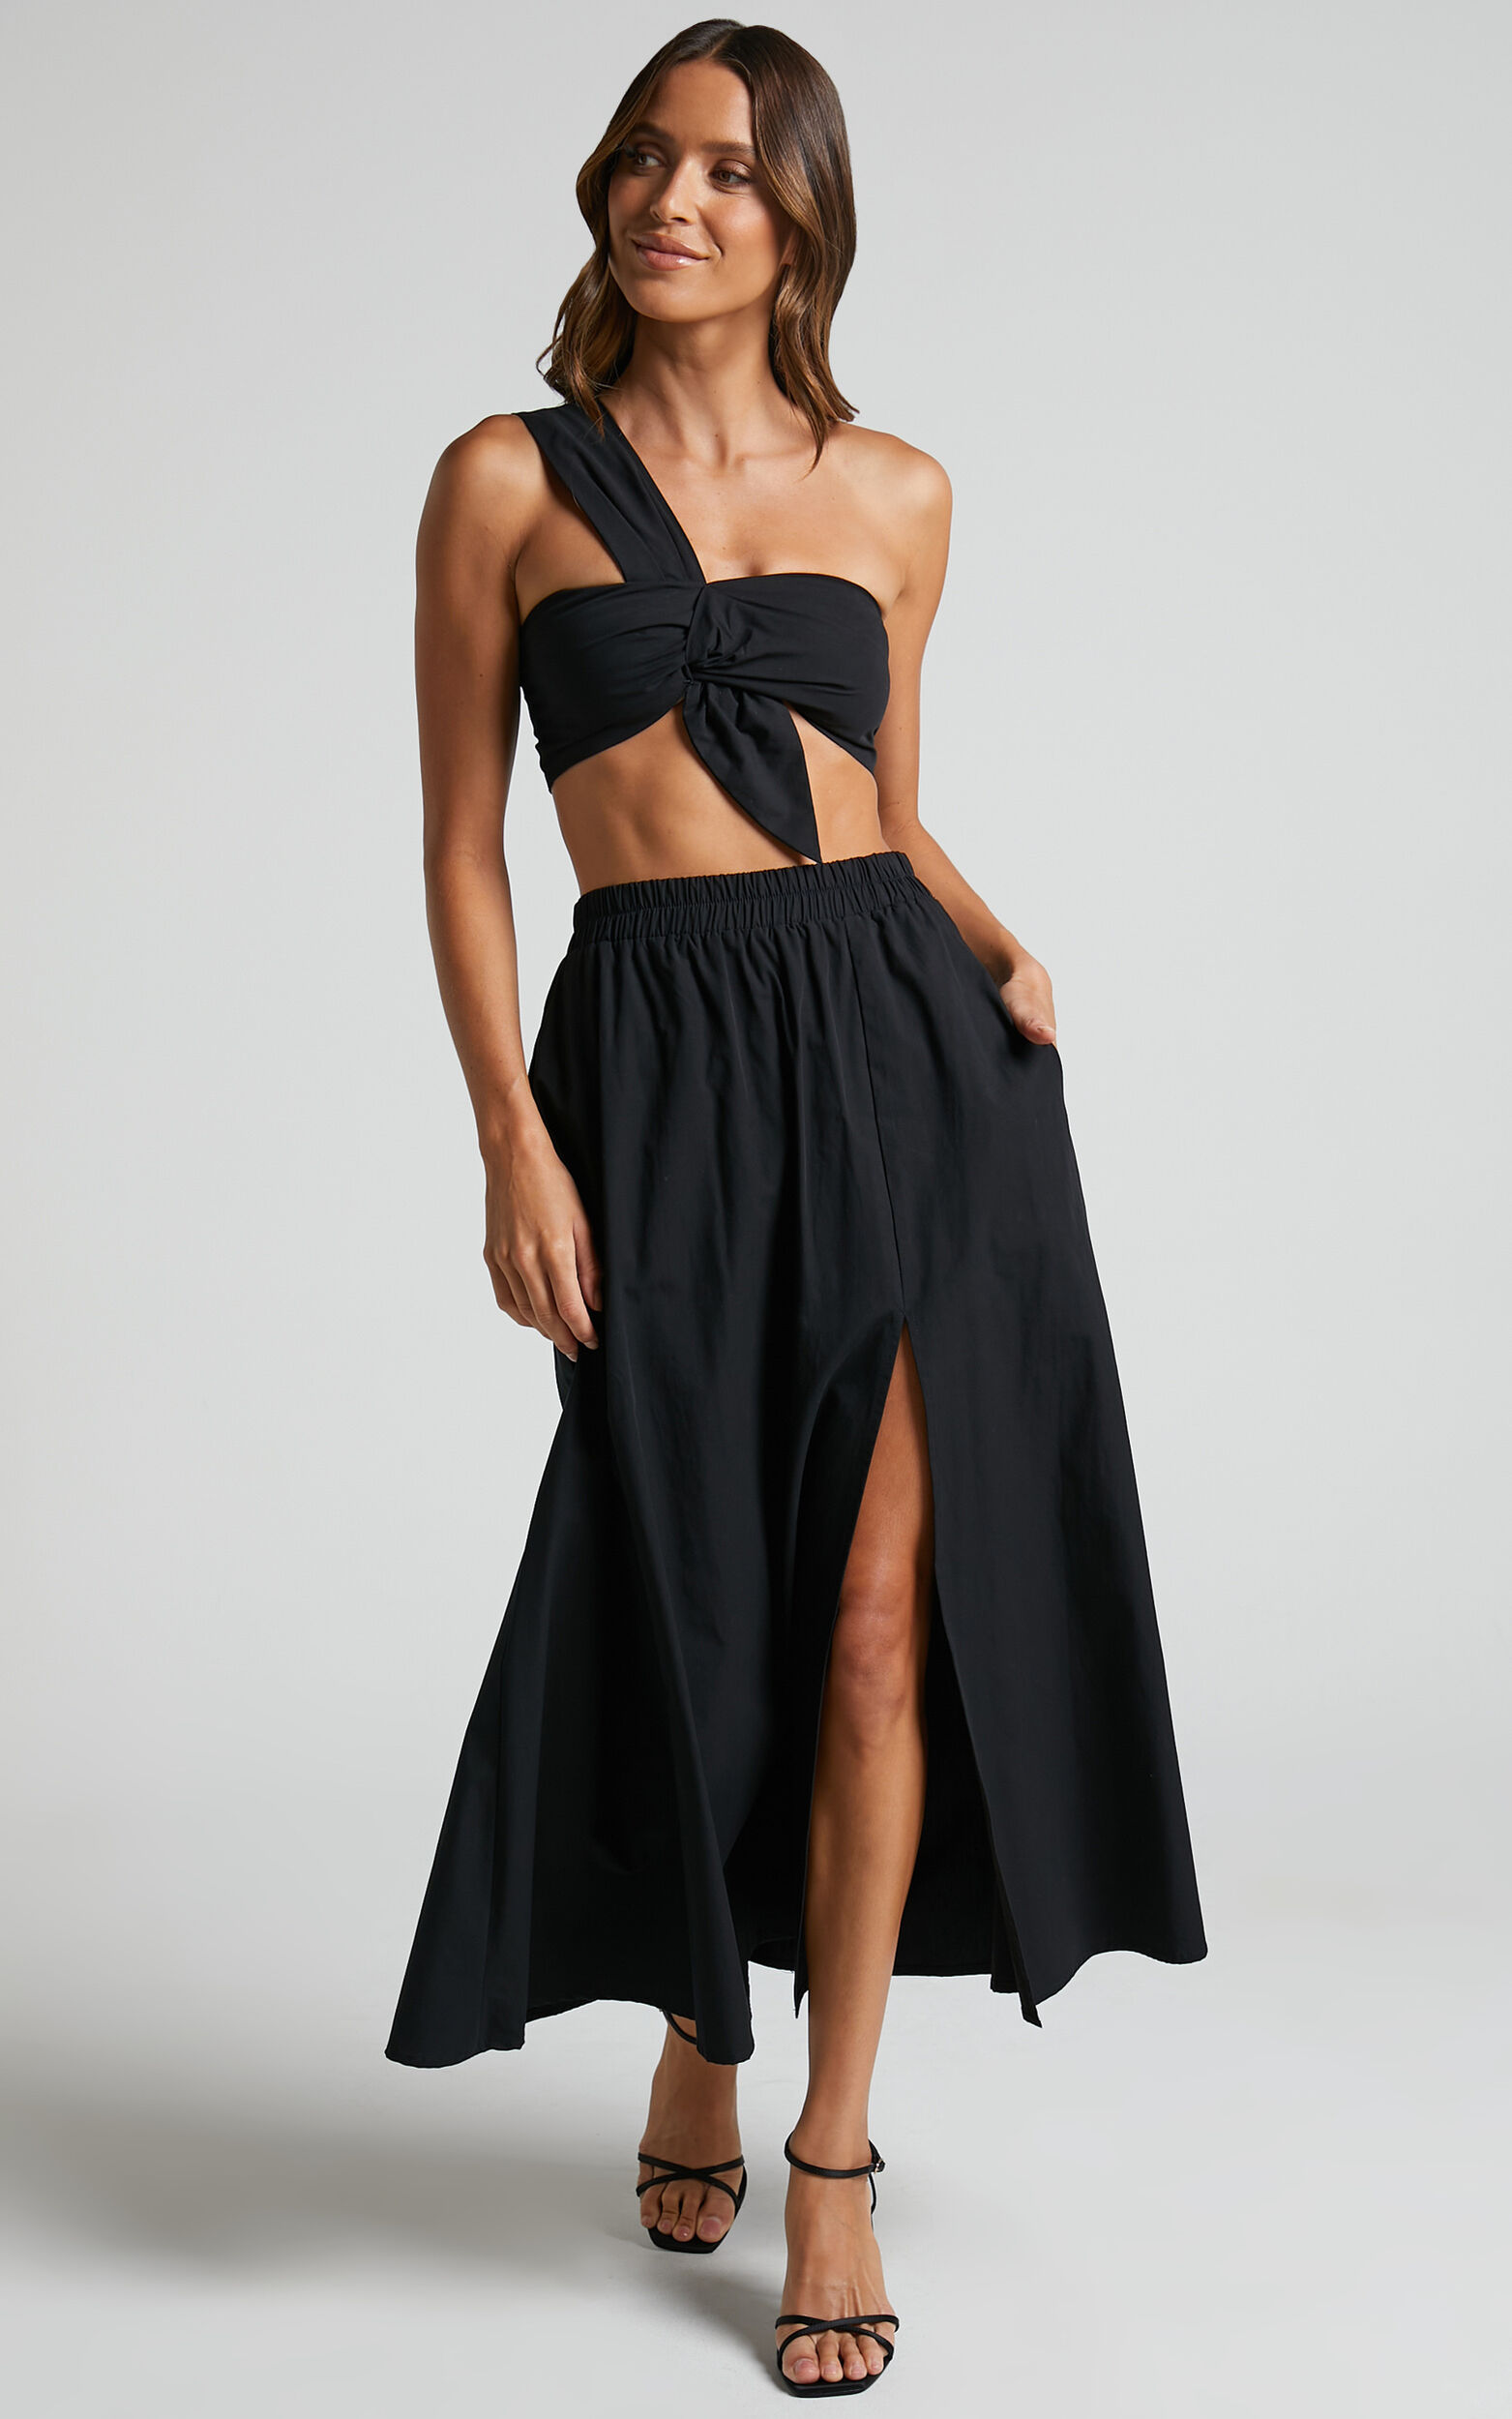 Sula Two Piece Set - One Shoulder Bralette Crop Top and Midi Skirt Set in Black - 04, BLK1